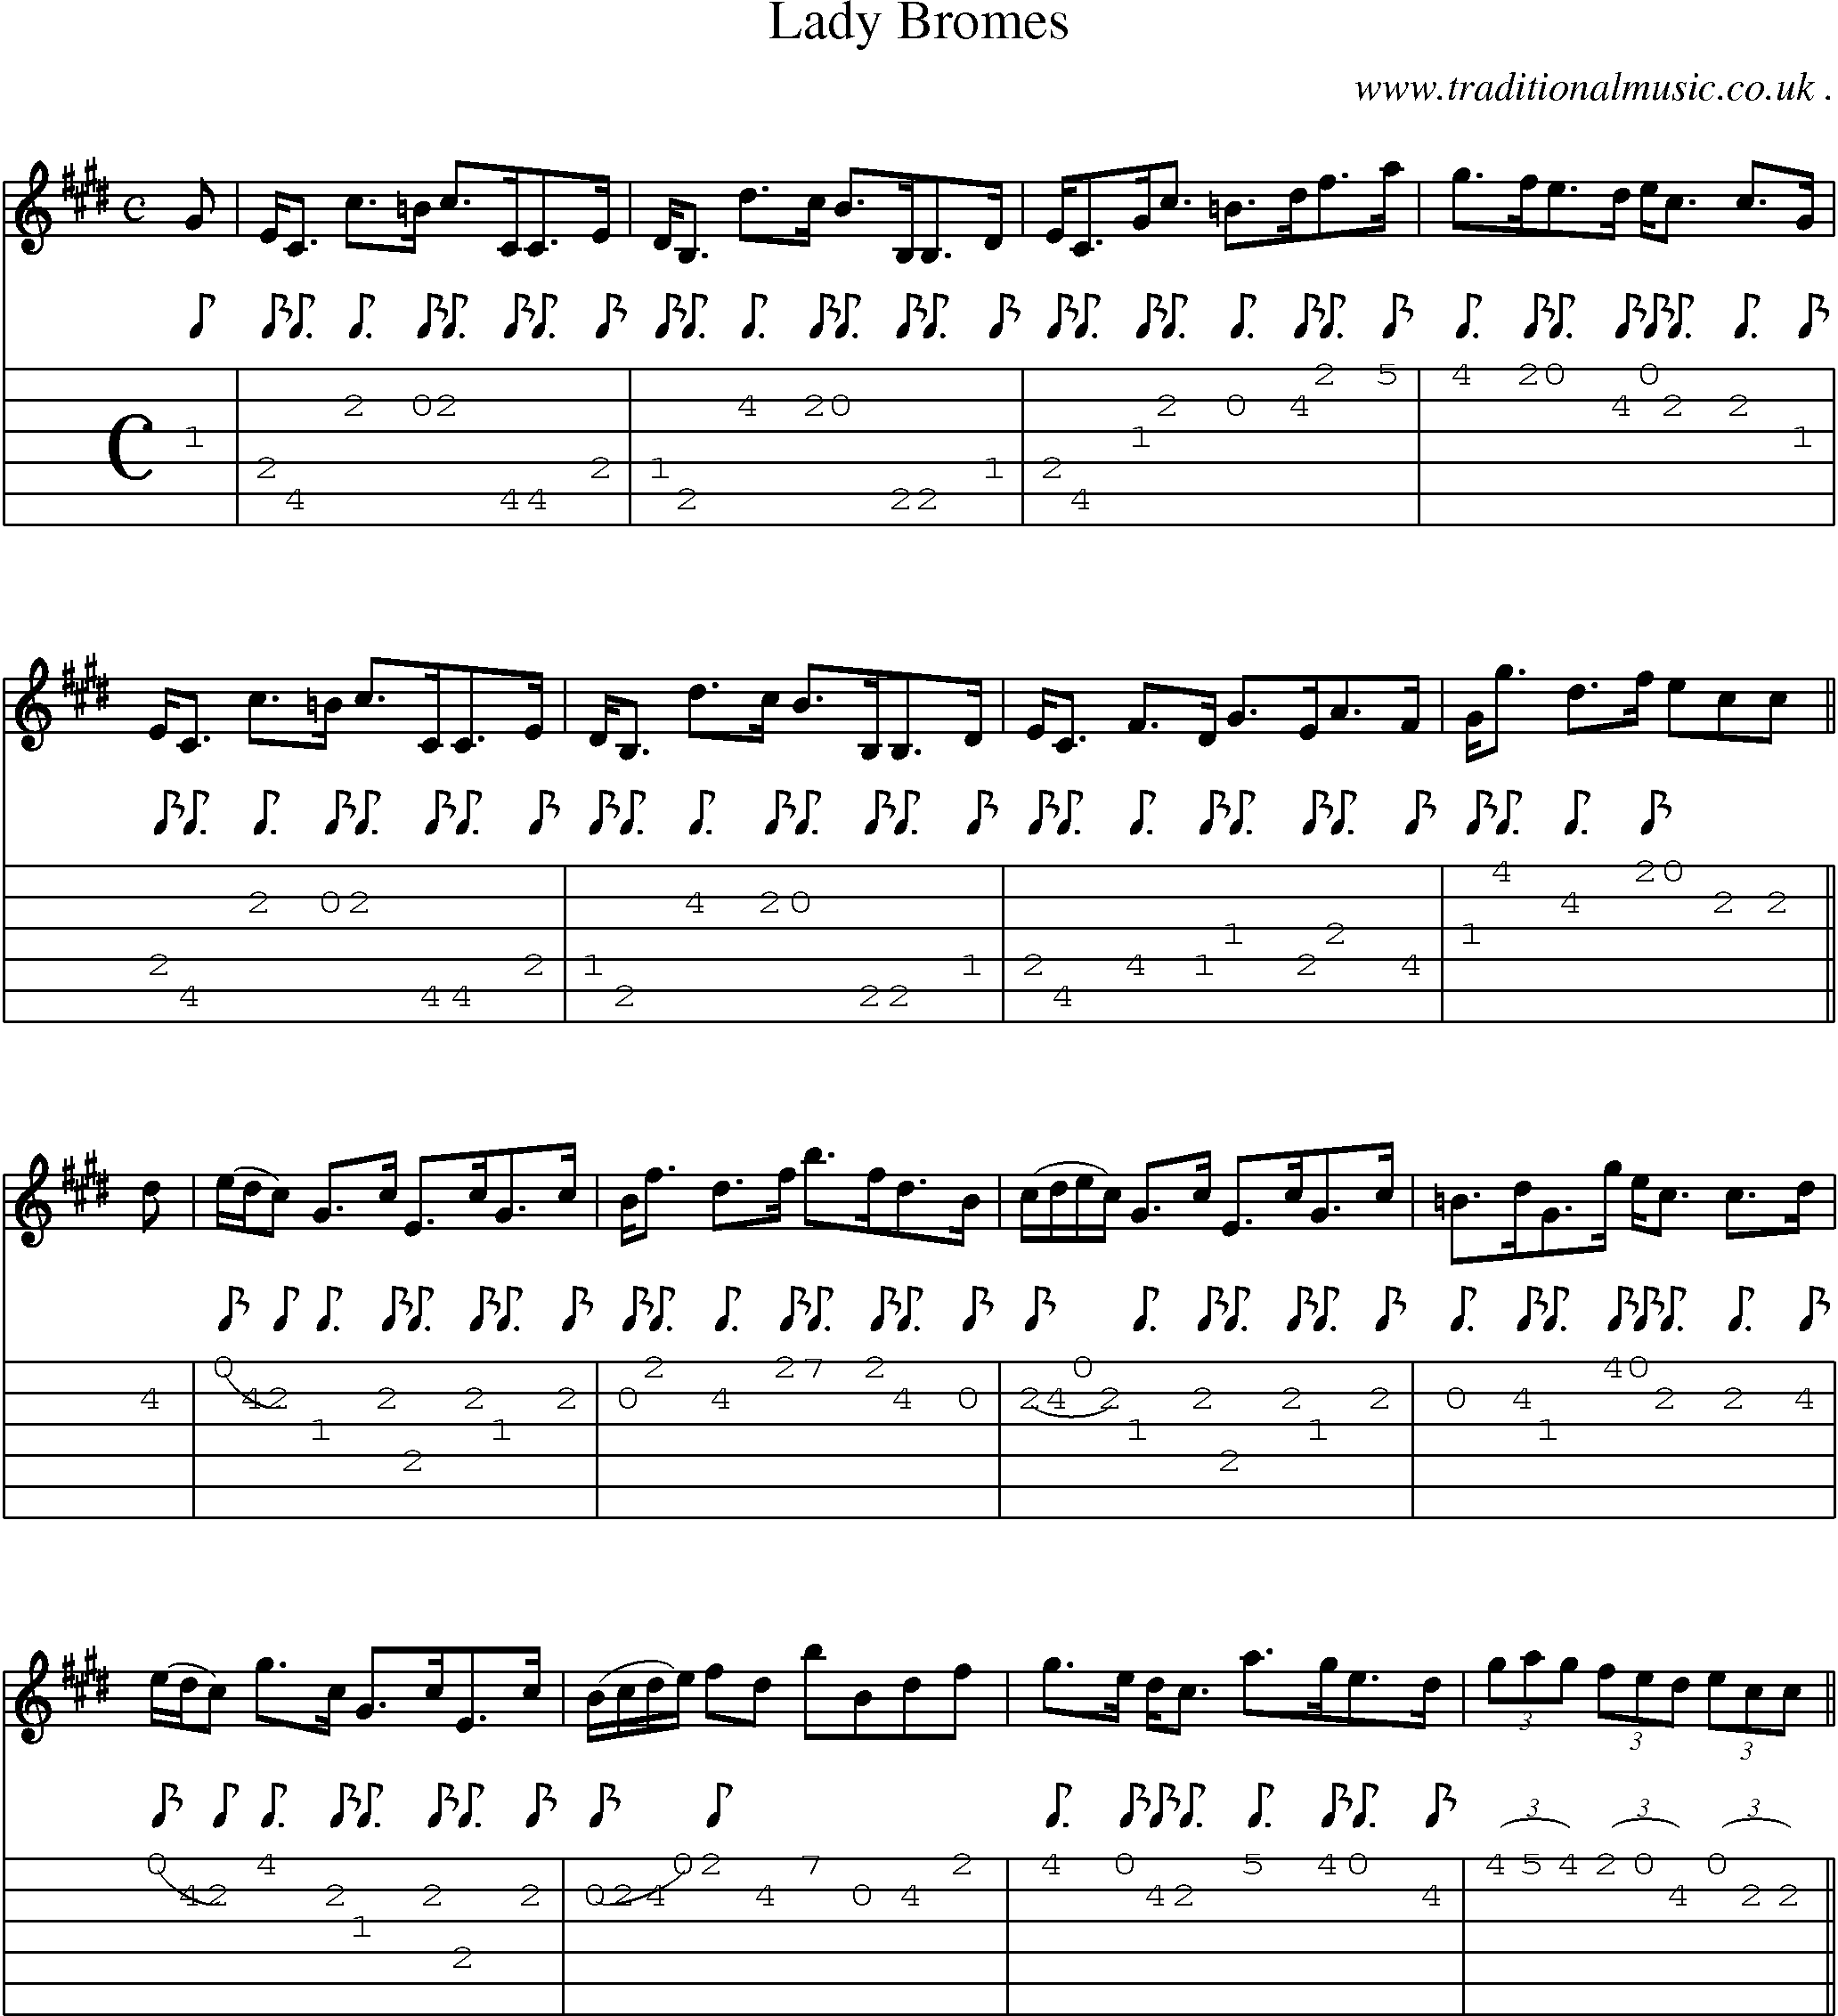 Sheet-music  score, Chords and Guitar Tabs for Lady Bromes